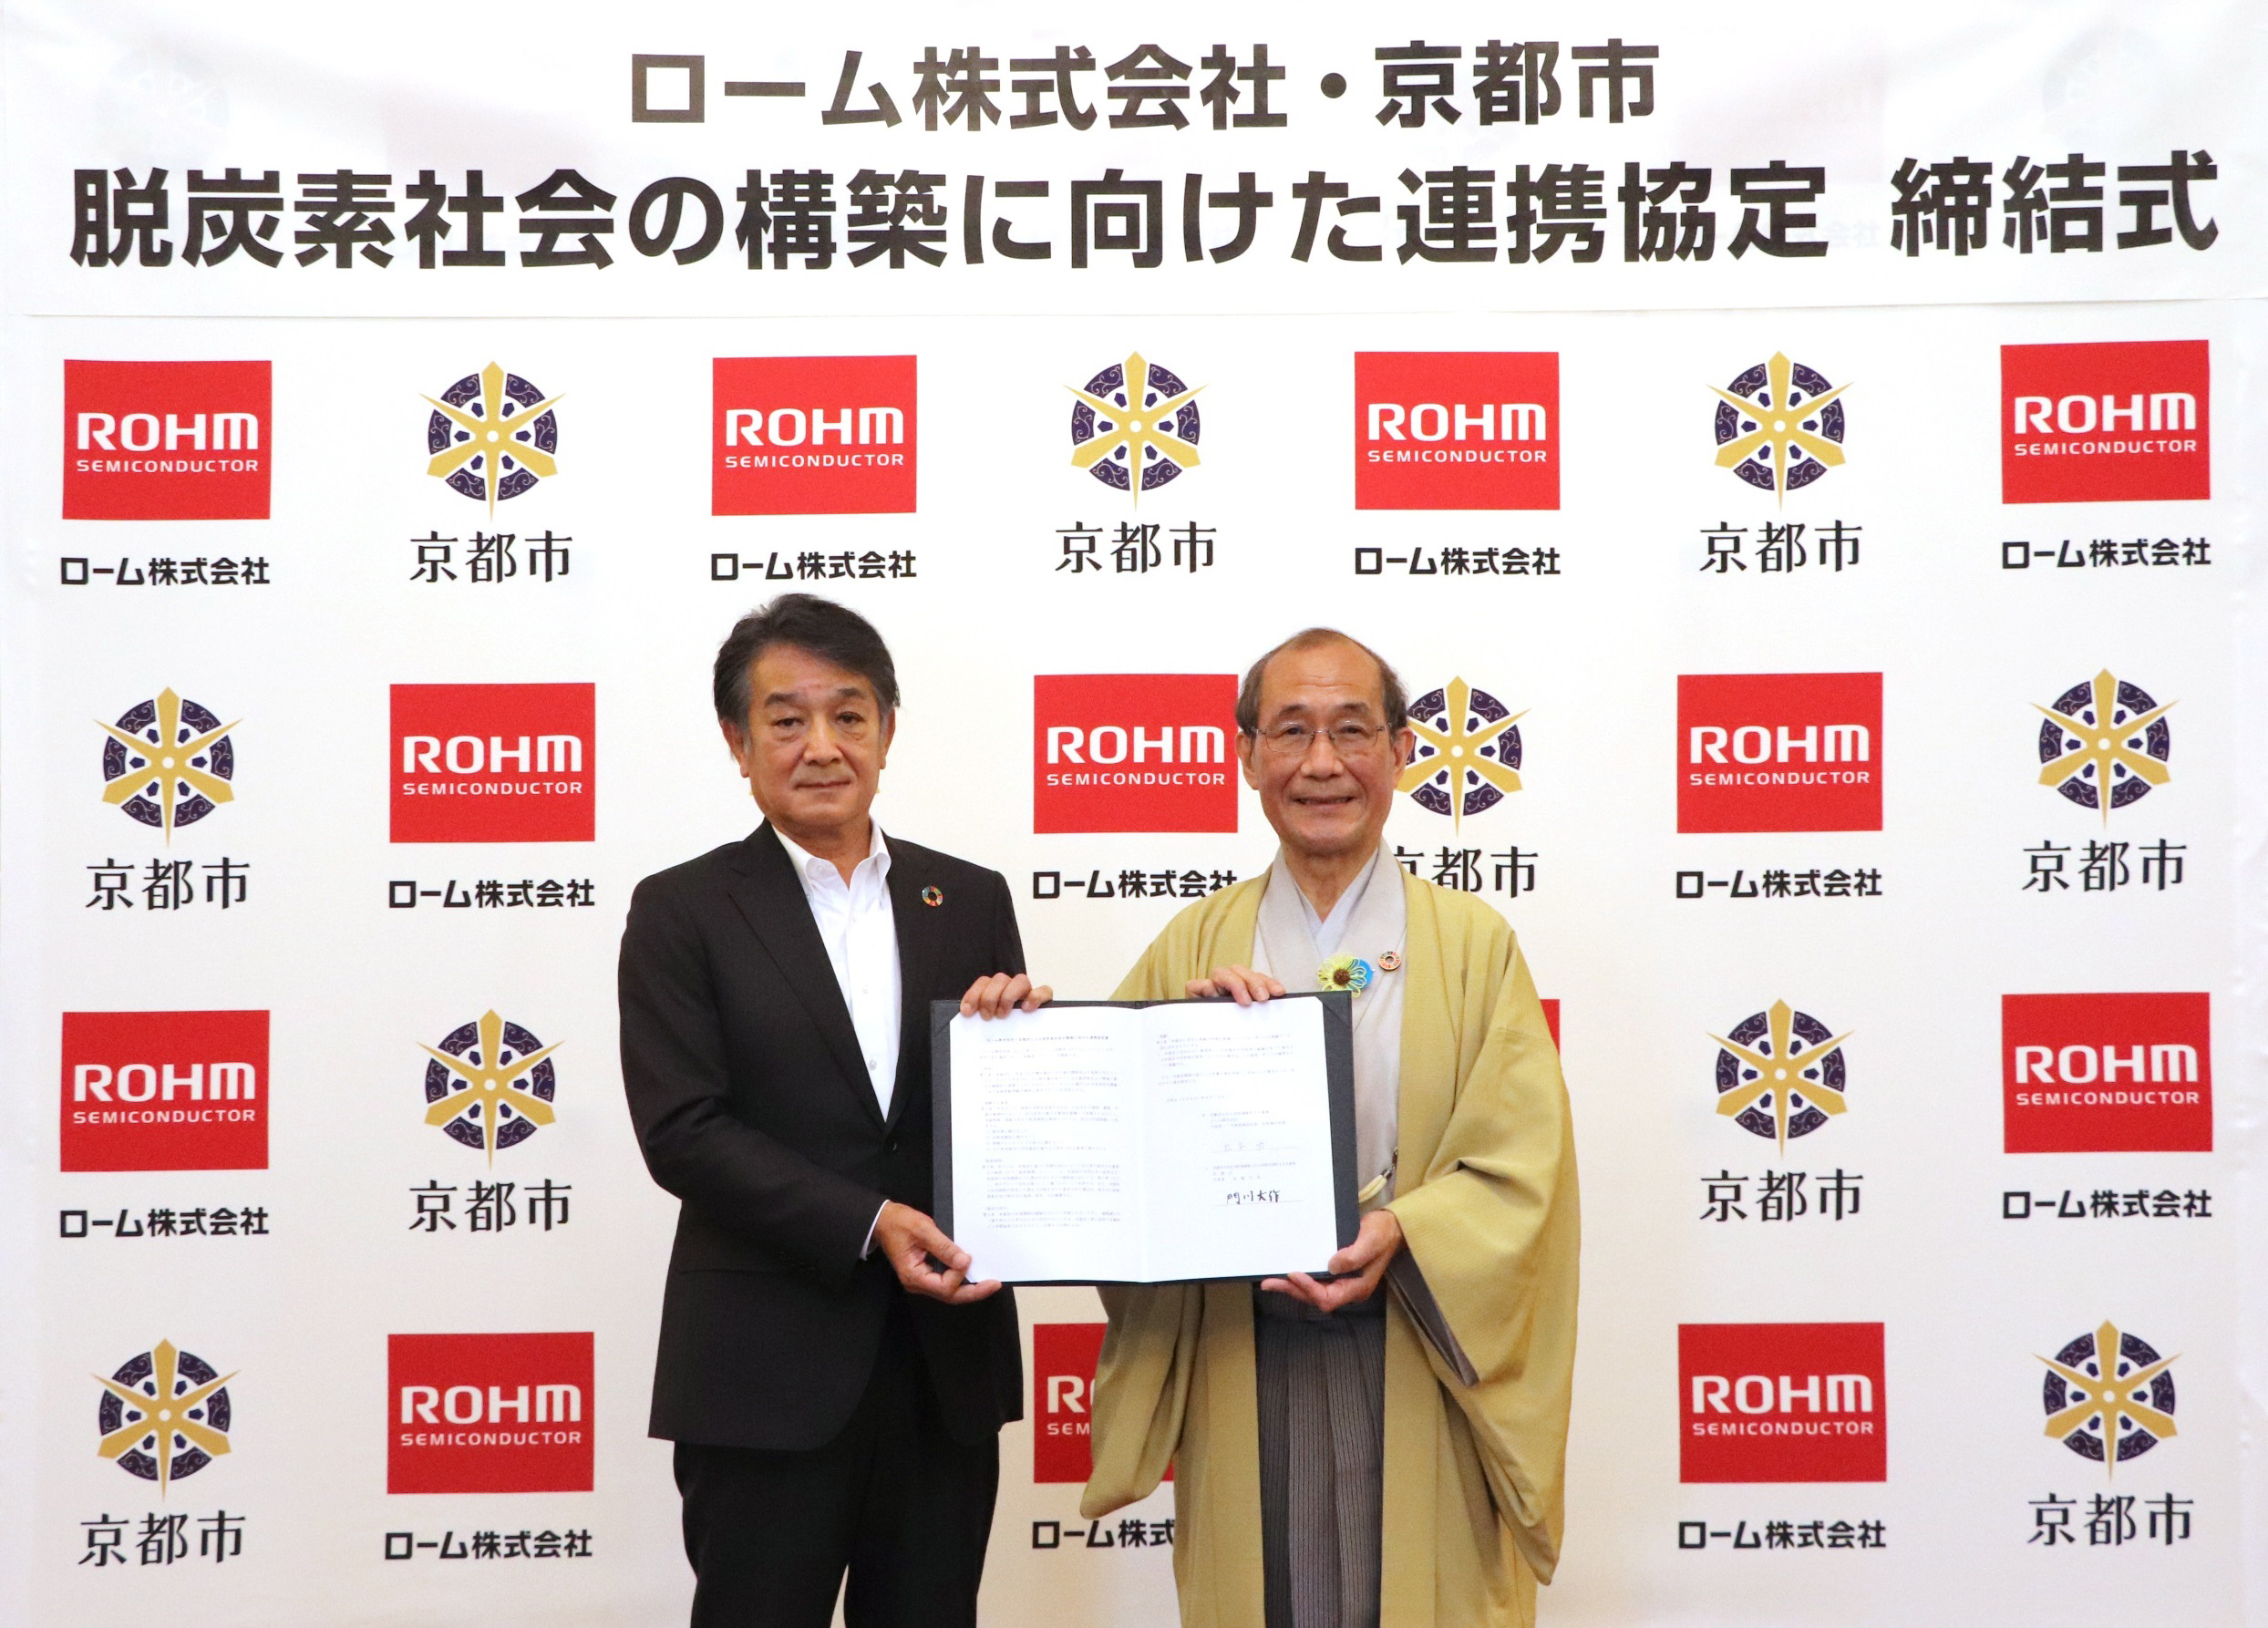 Signed a partnership agreement with Kyoto City to build a decarbonized society